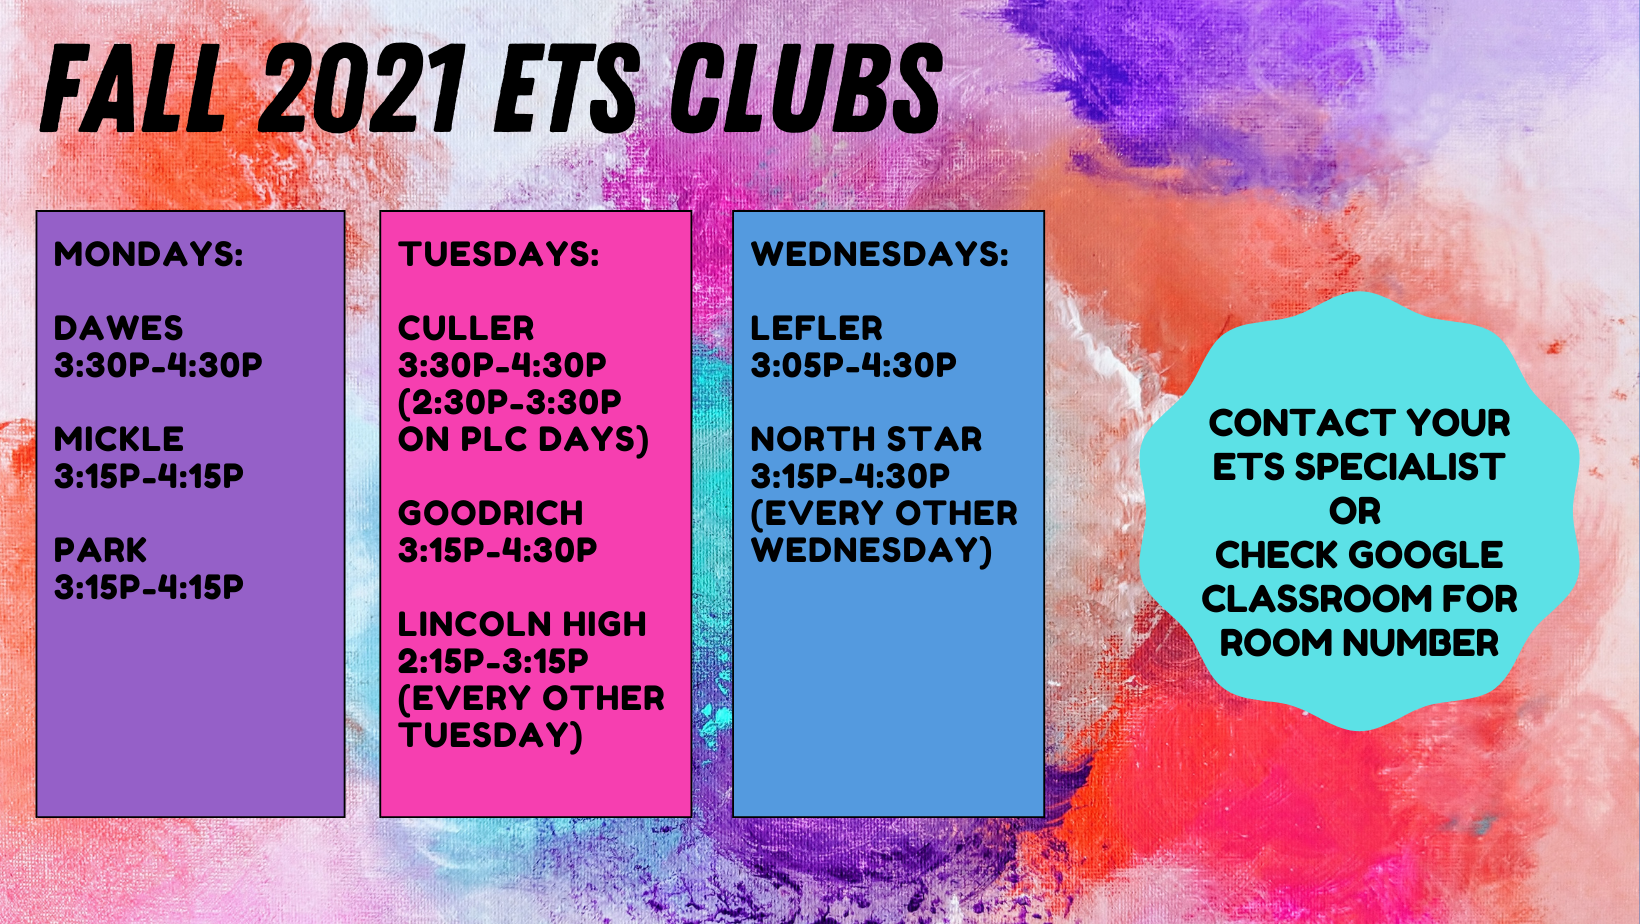 Fall 2021 ETS Clubs